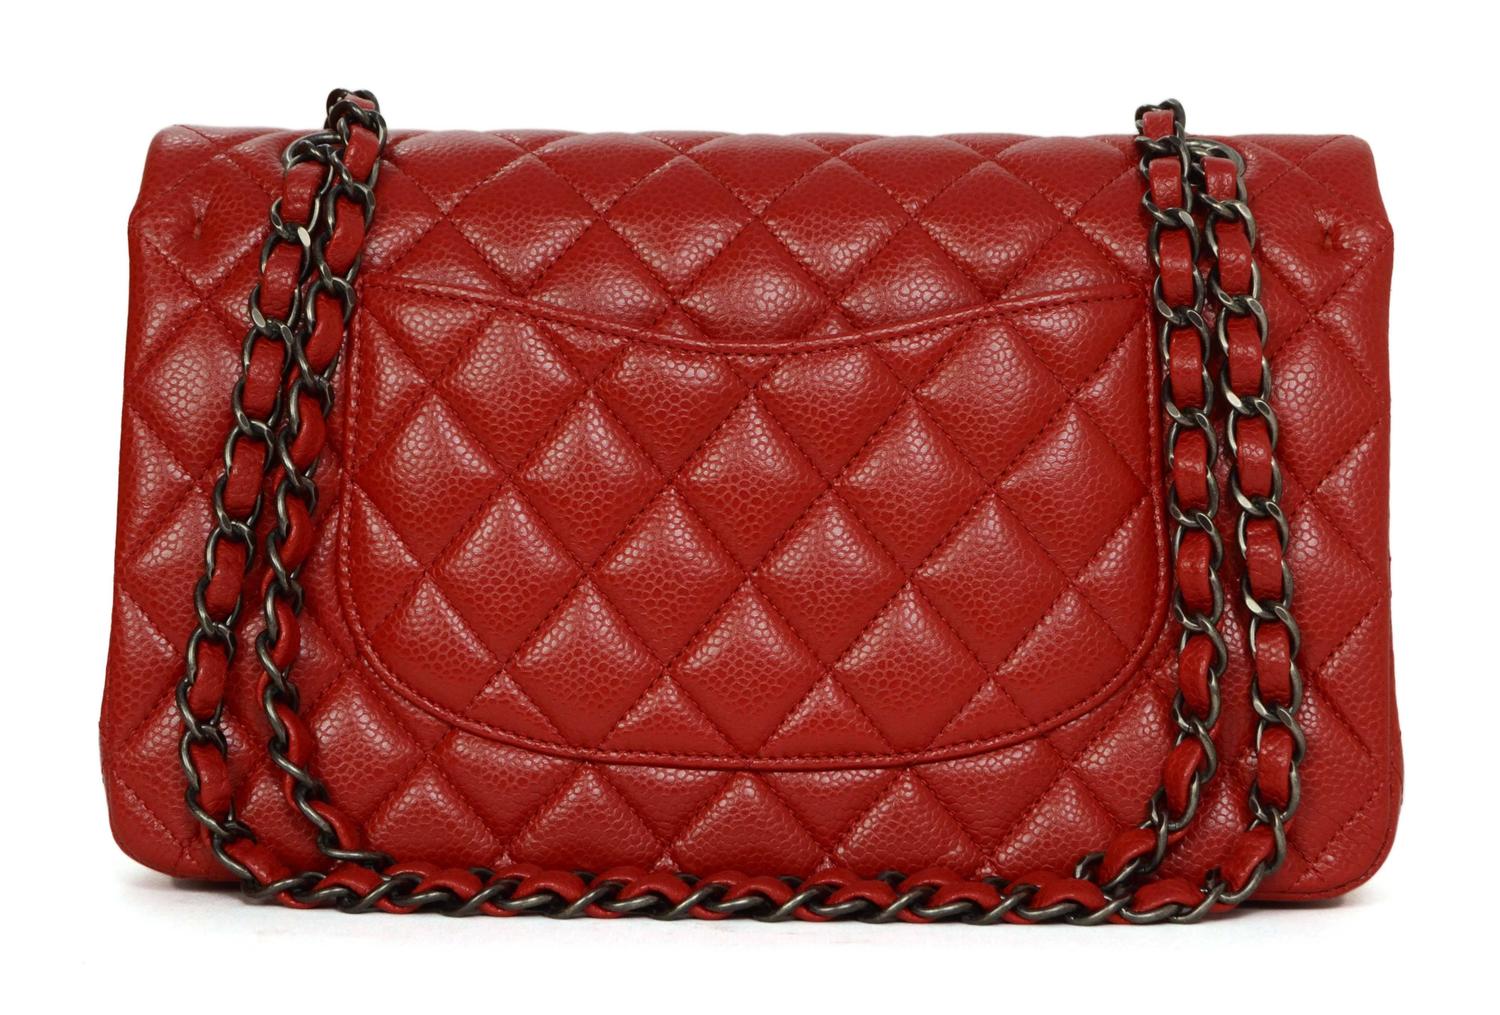 Chanel Red Caviar Medium Classic Double Flap Bag SHW at 1stdibs